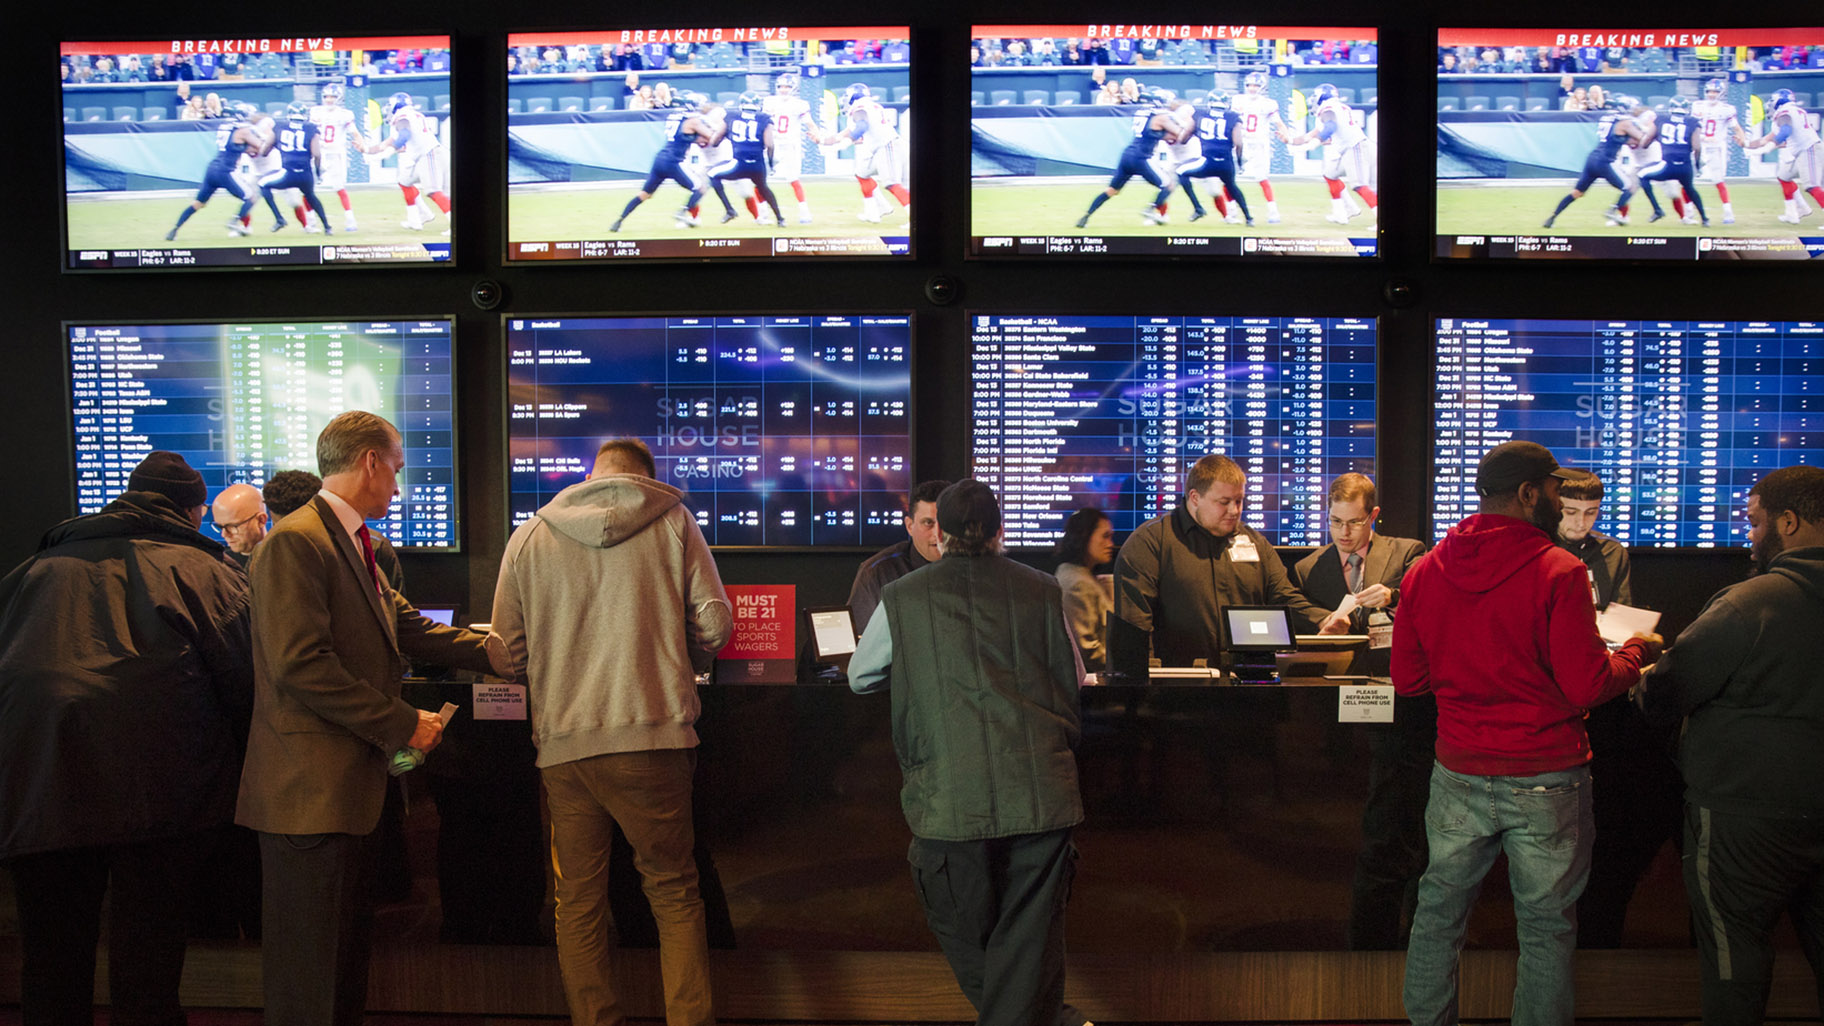 Pritzker Makes Push for Legal Sports Betting | Chicago News | WTTW